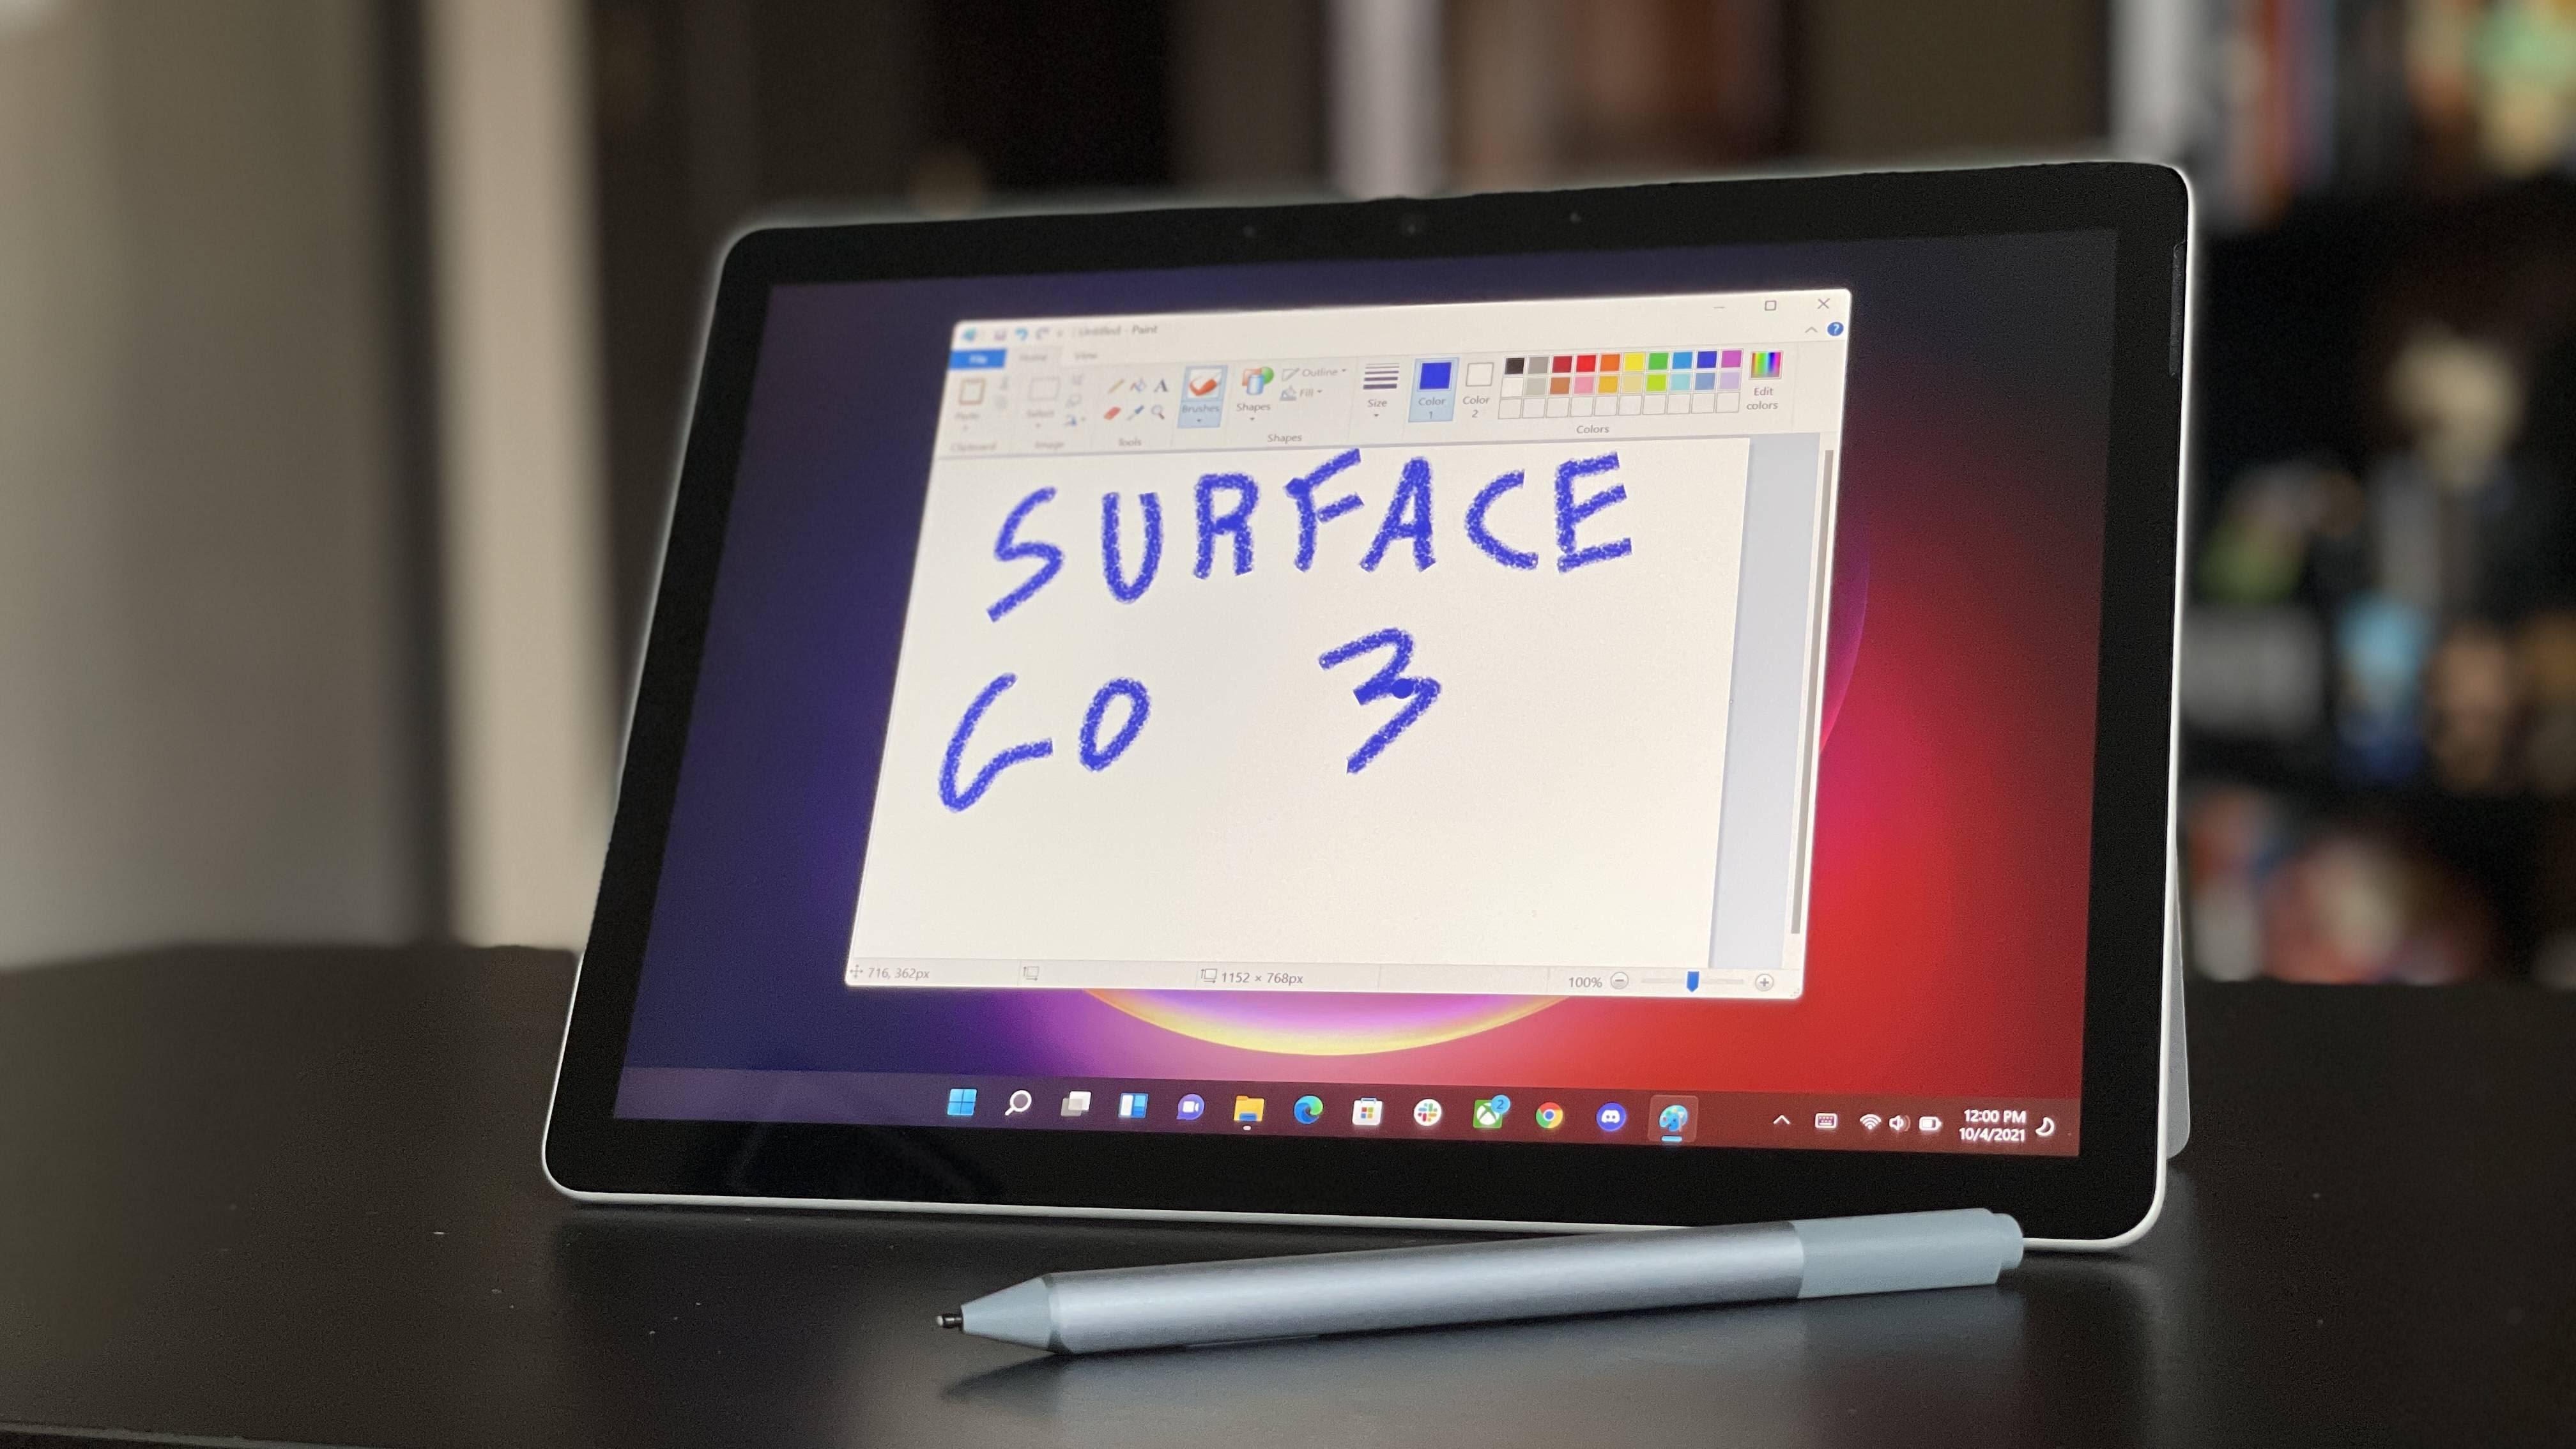 Microsoft surface go 3 review: A light, portable and effective tablet